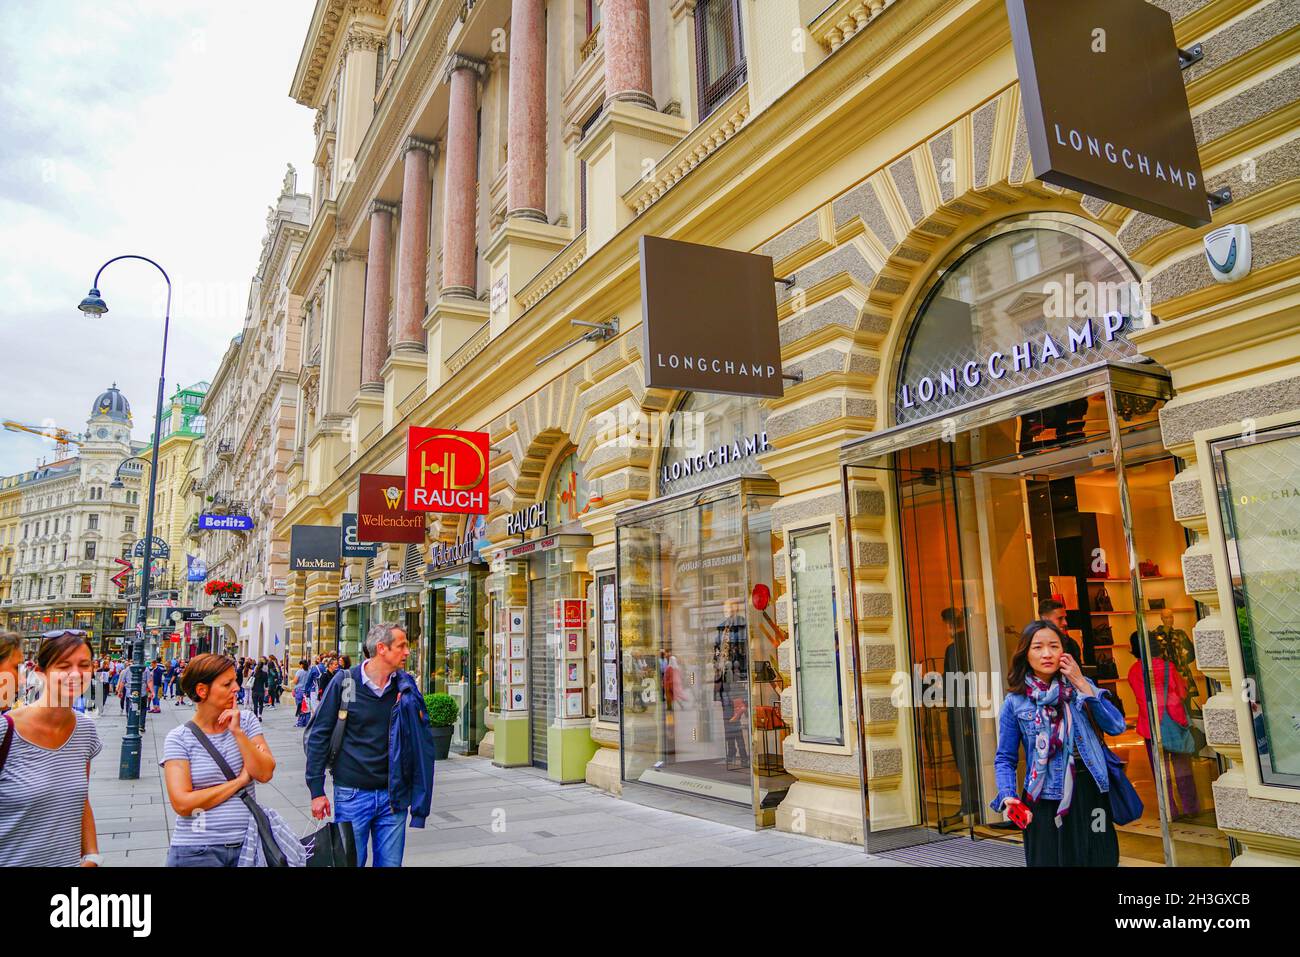 Traditional Vienna goes brand crazy in luxury facelift